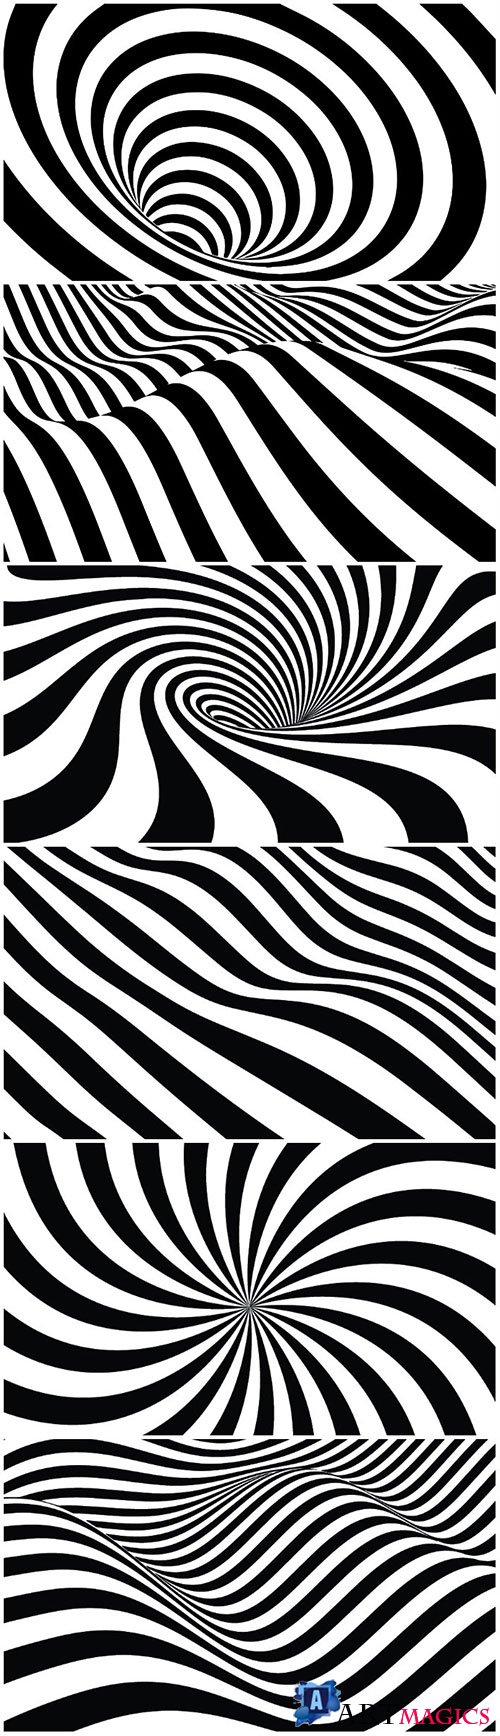 Black and white 3d vector lines background